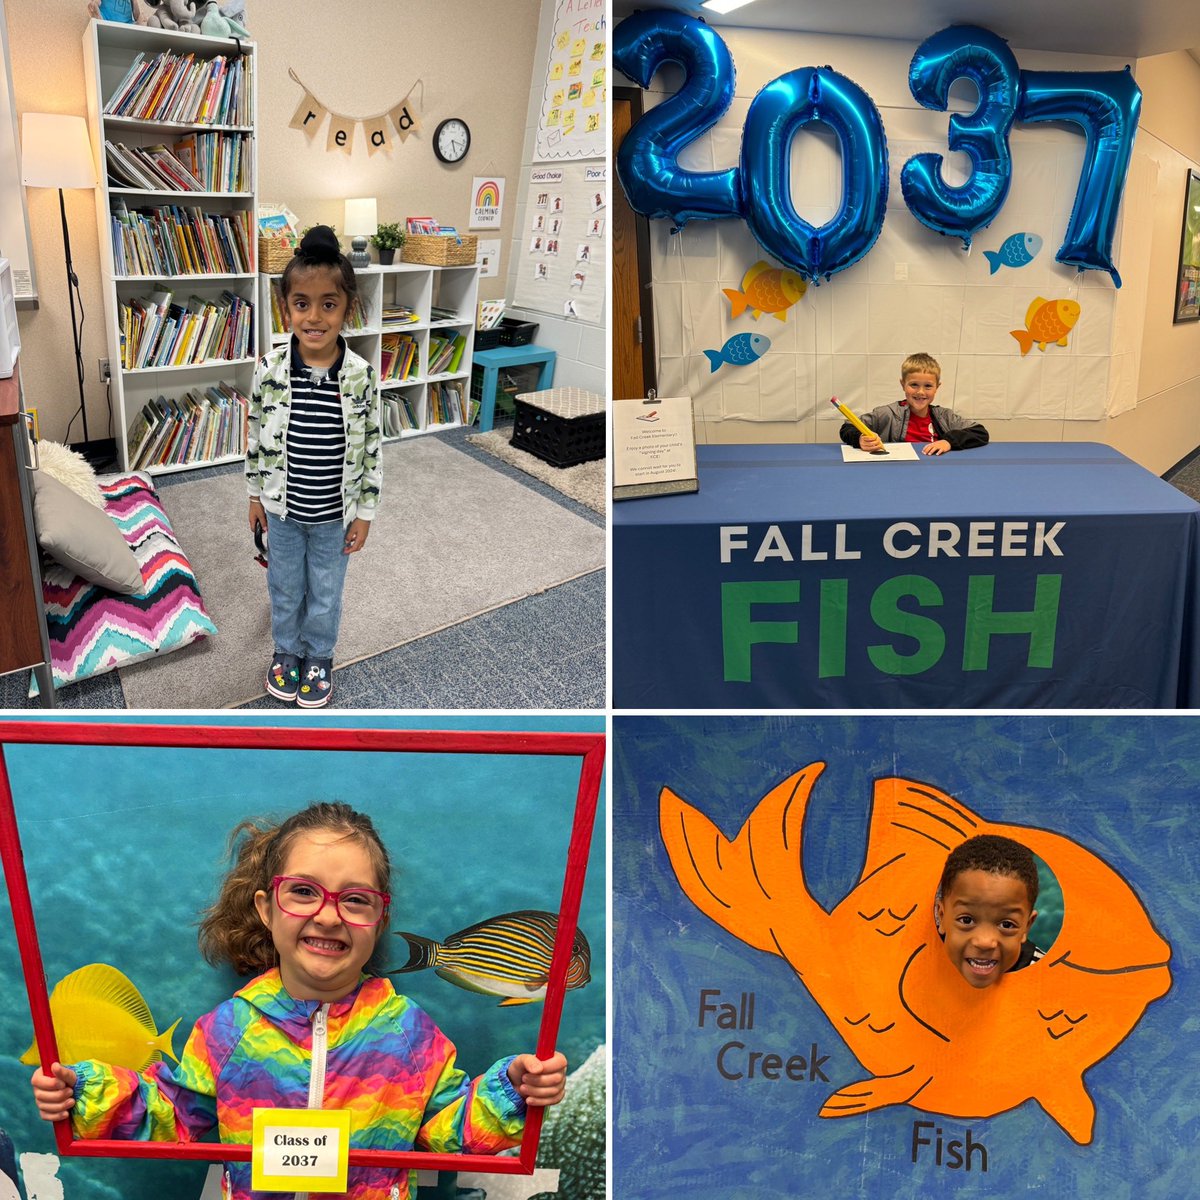 What an exciting night @FCEhse! 🤗 We have really enjoyed meeting our new #FCEfish kndg starting next year! 🐠 #Yes, welcome the Class of 2️⃣0️⃣3️⃣7️⃣! @HSESchools